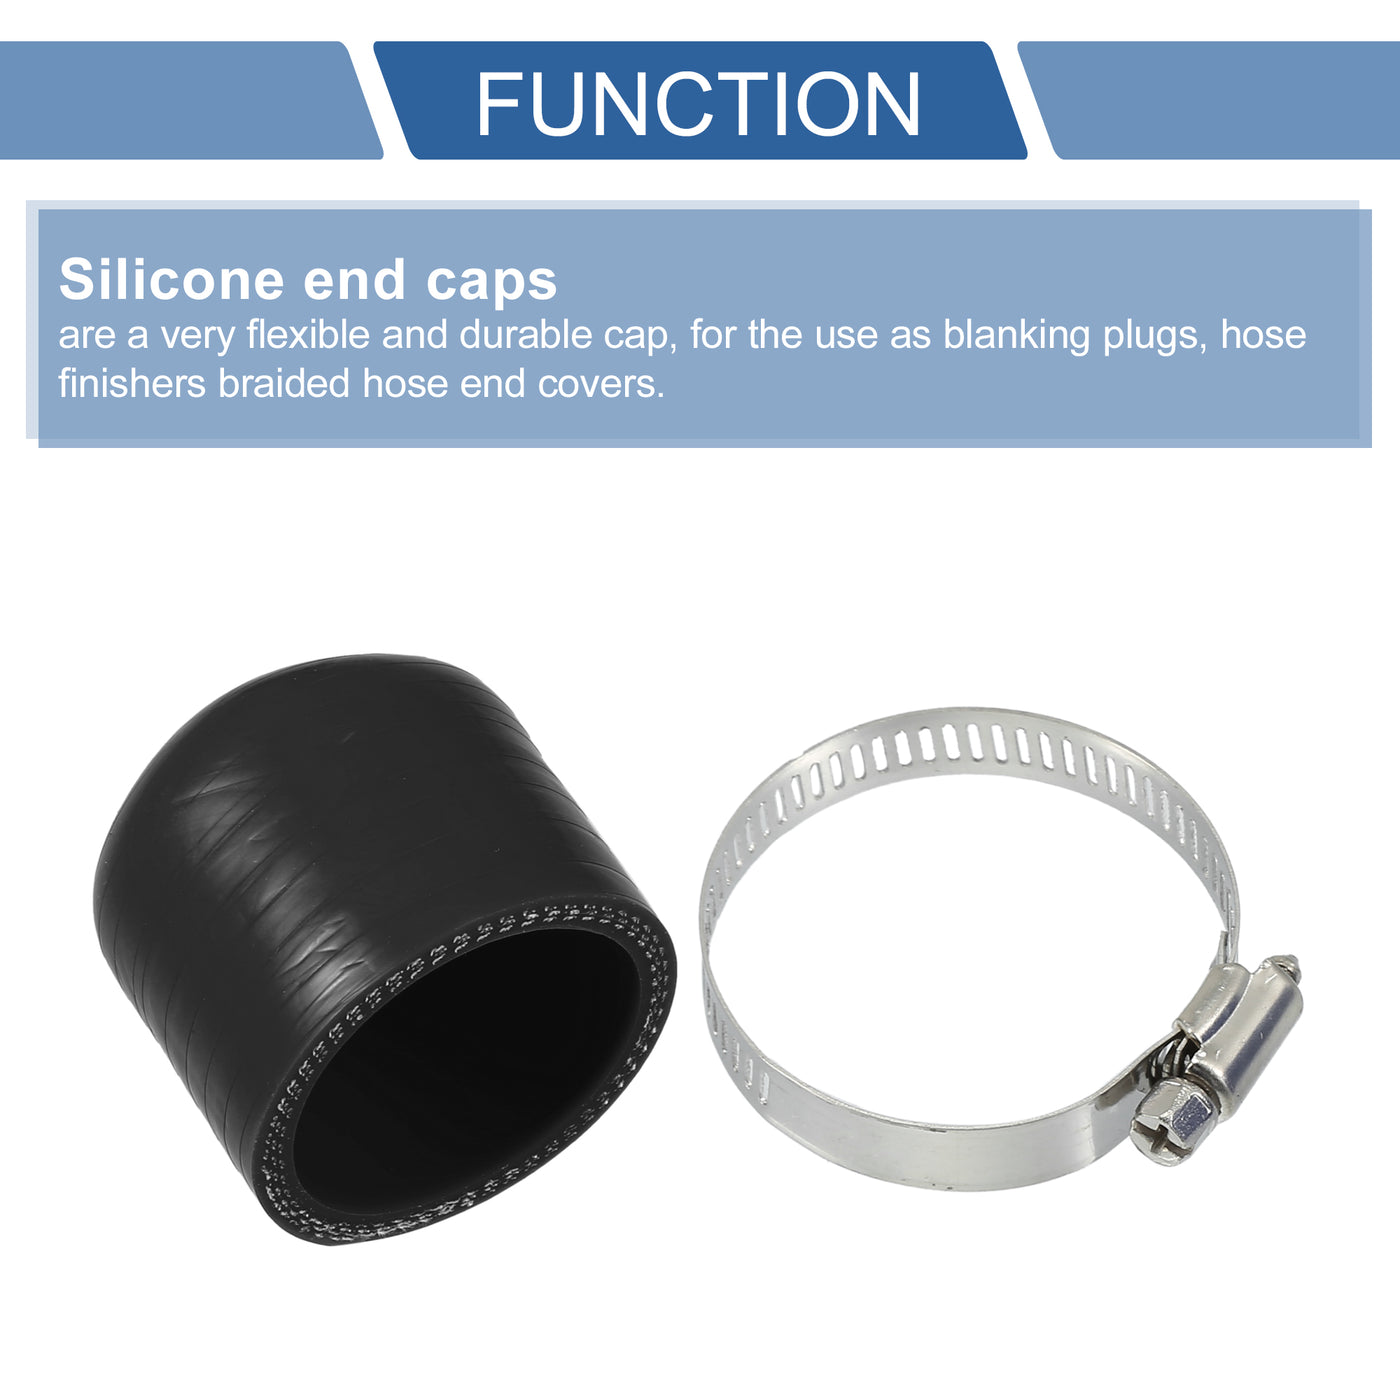 X AUTOHAUX 1 Set 30mm Length 38mm/1.50" ID Black Car Silicone Rubber Hose End Cap with Clamps Silicone Reinforced Blanking Cap for Bypass Tube Universal